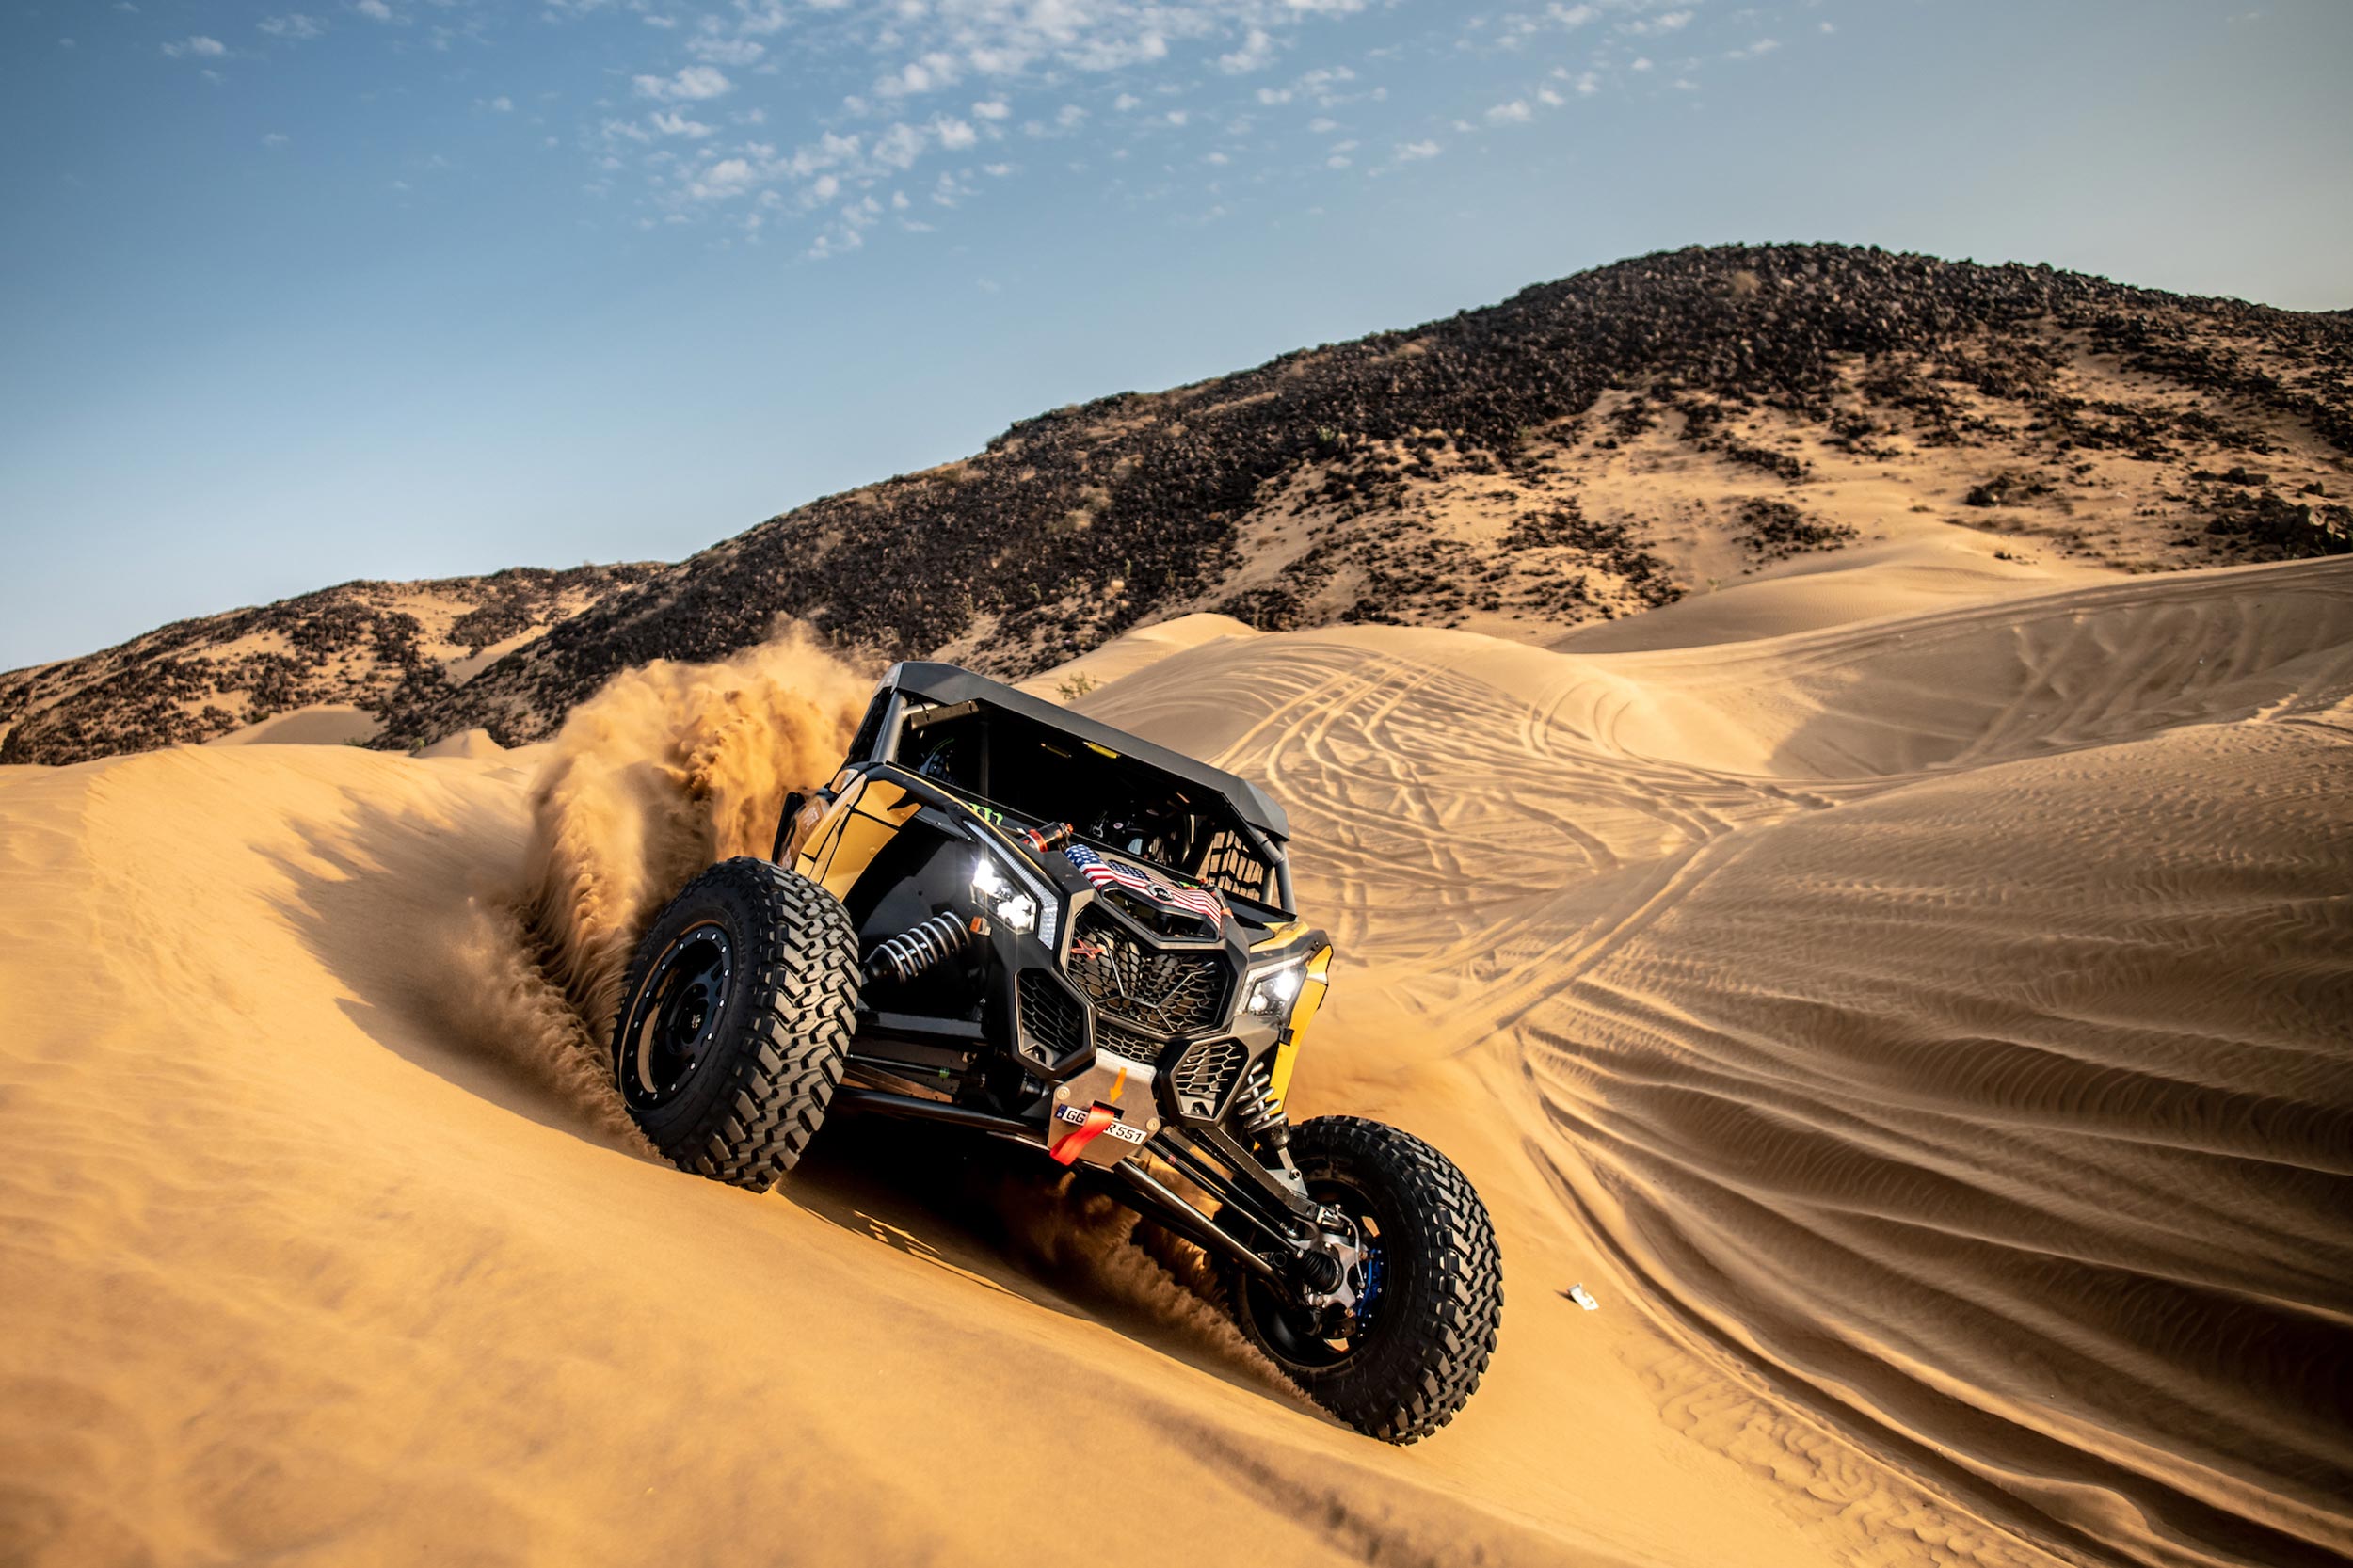 SOUTH RACING CAN-AM TEAMS WIN BOTH T3 & T4 CATEGORIES AT THE 2022 DAKAR RALLY